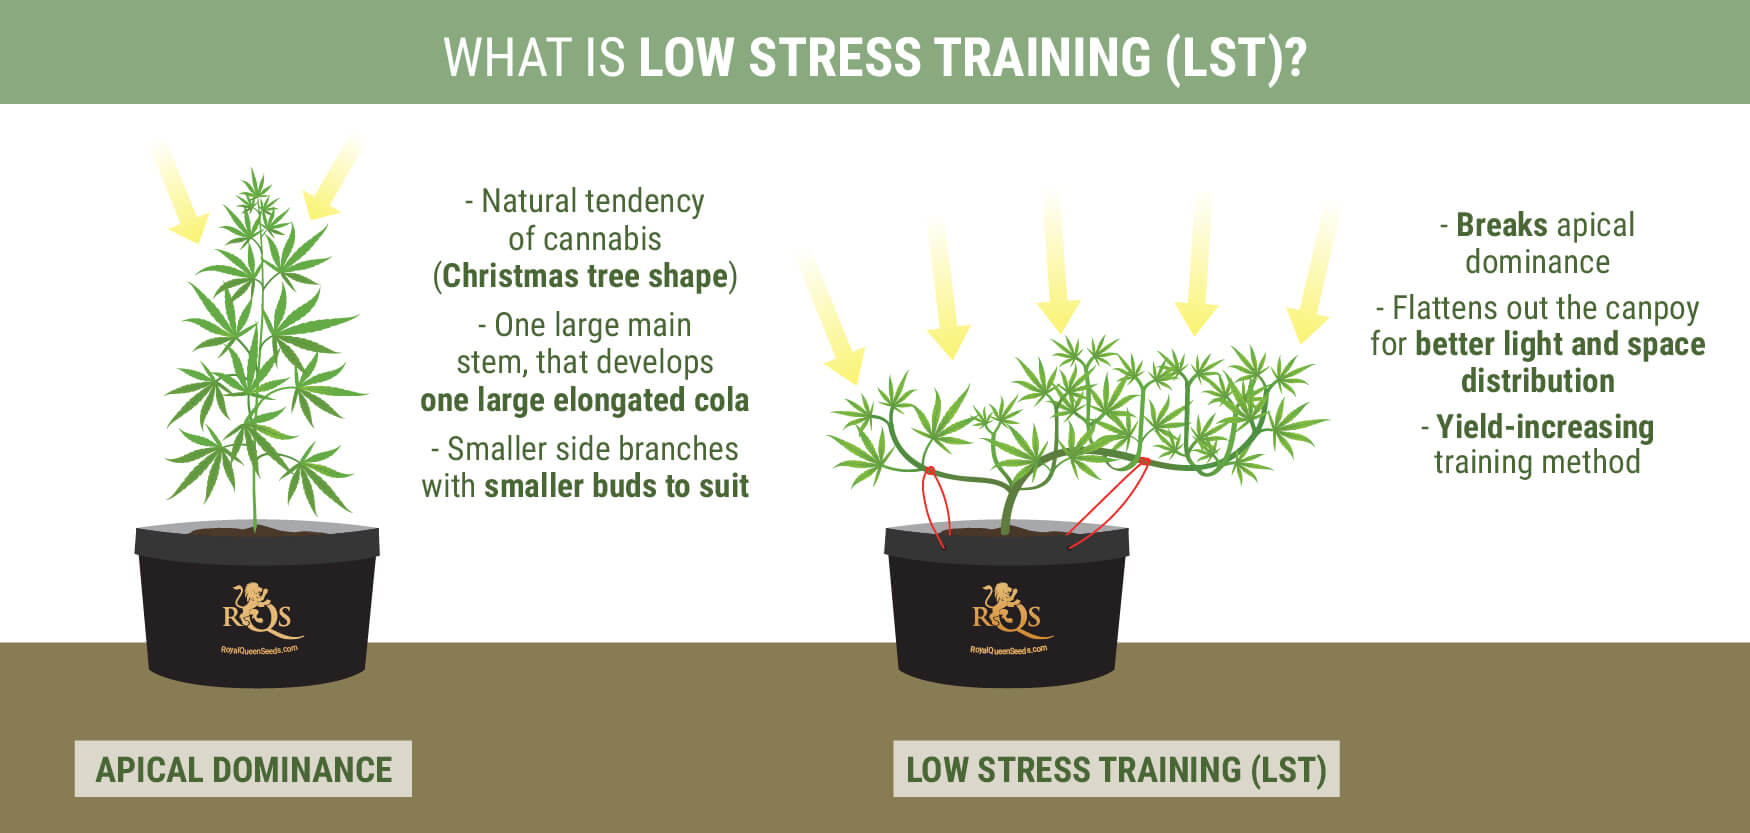 What is Low Stress Training?